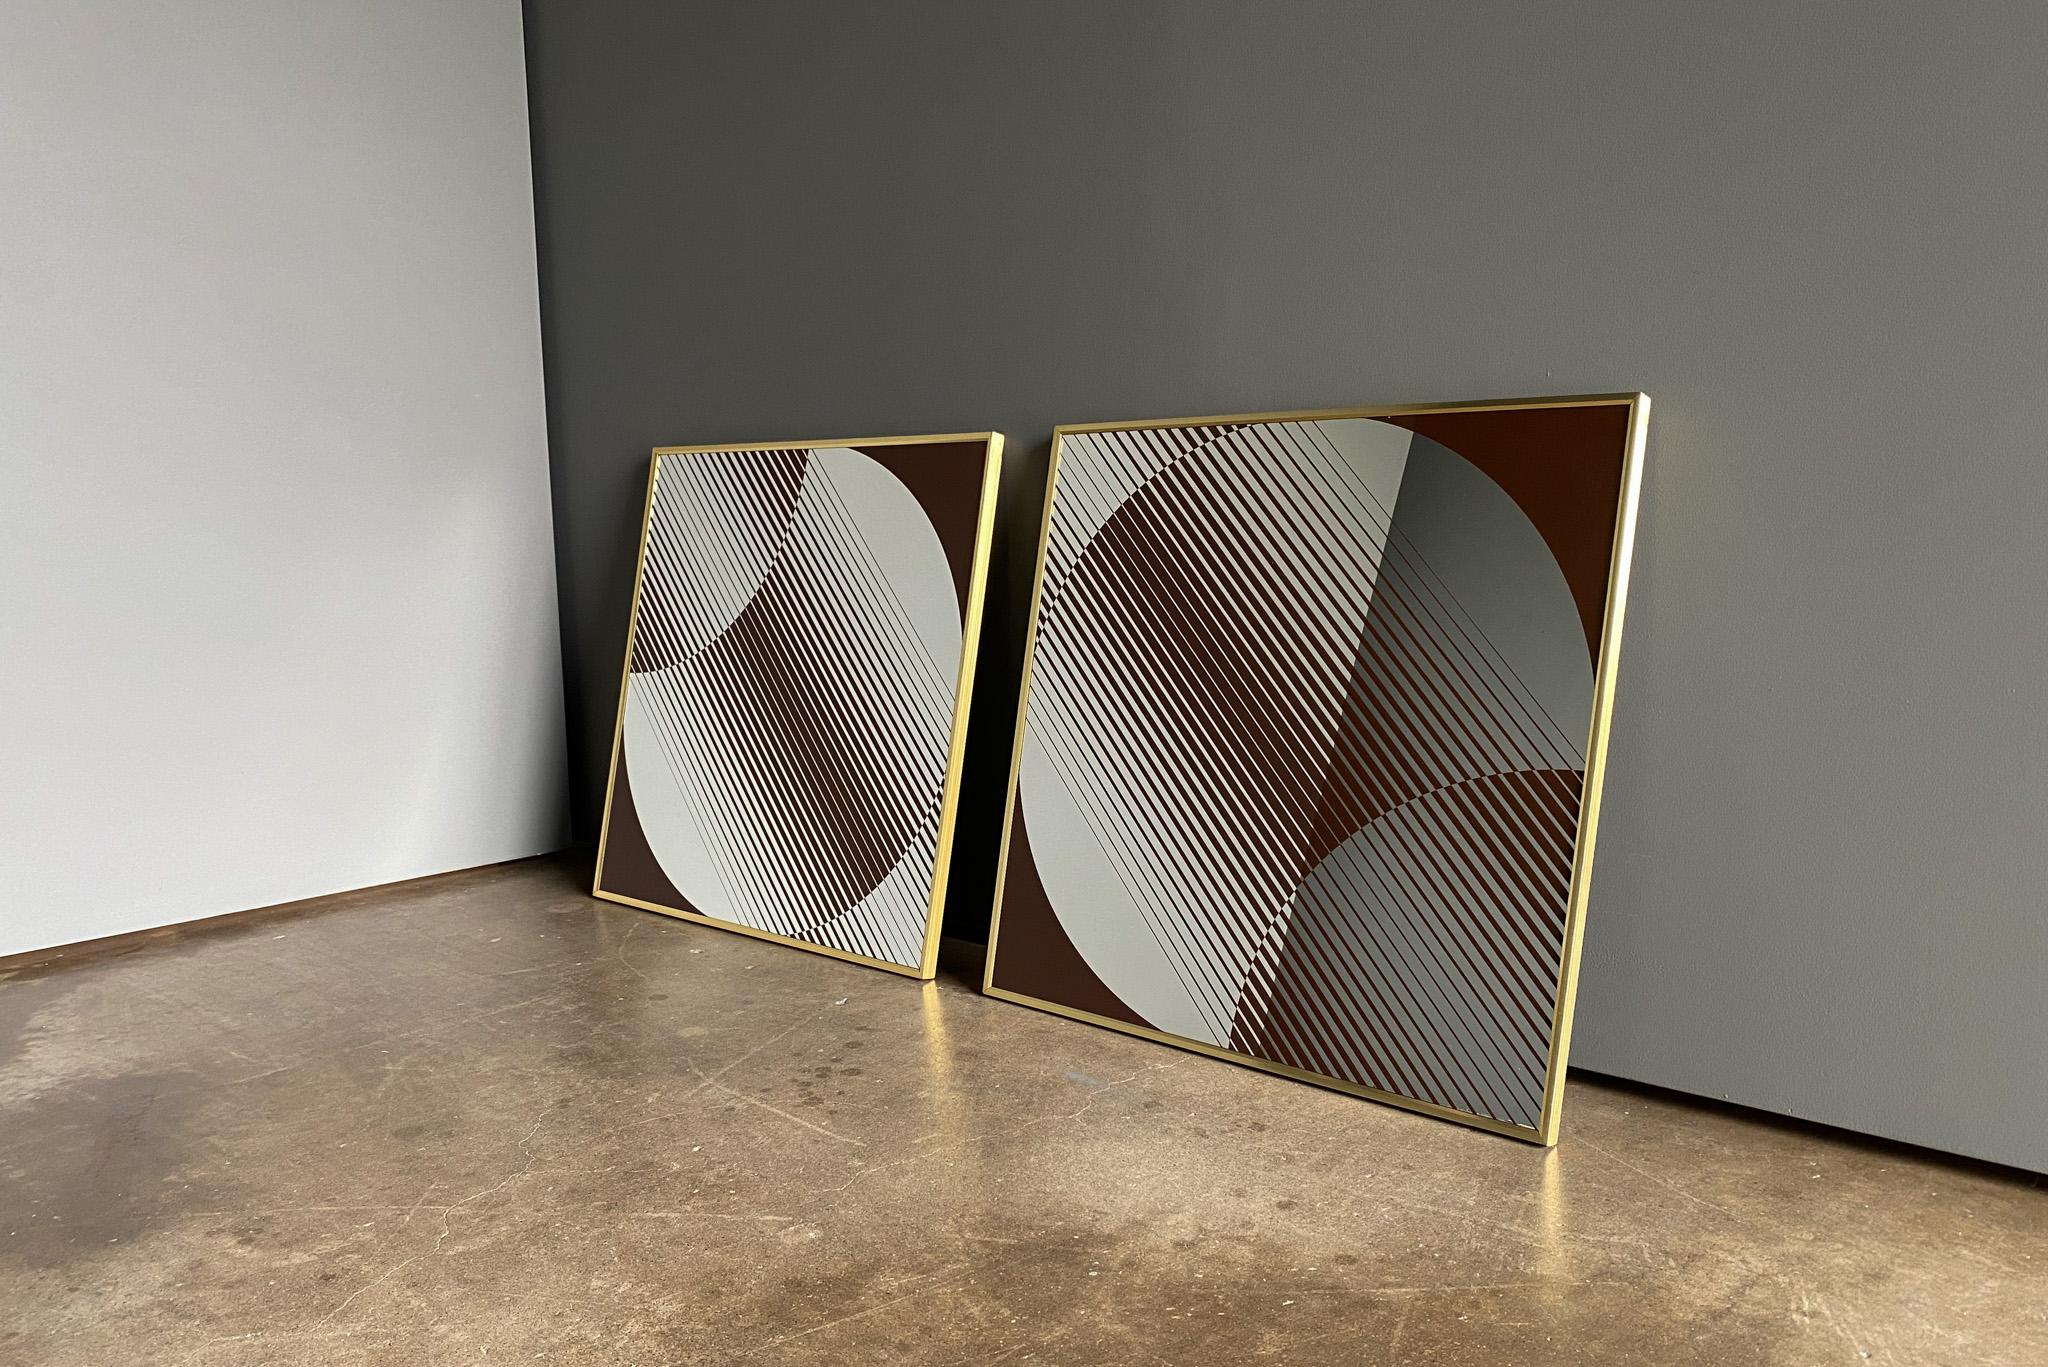 Turner Op Art Abstract Wall Mirrors, United States, 1970's  5